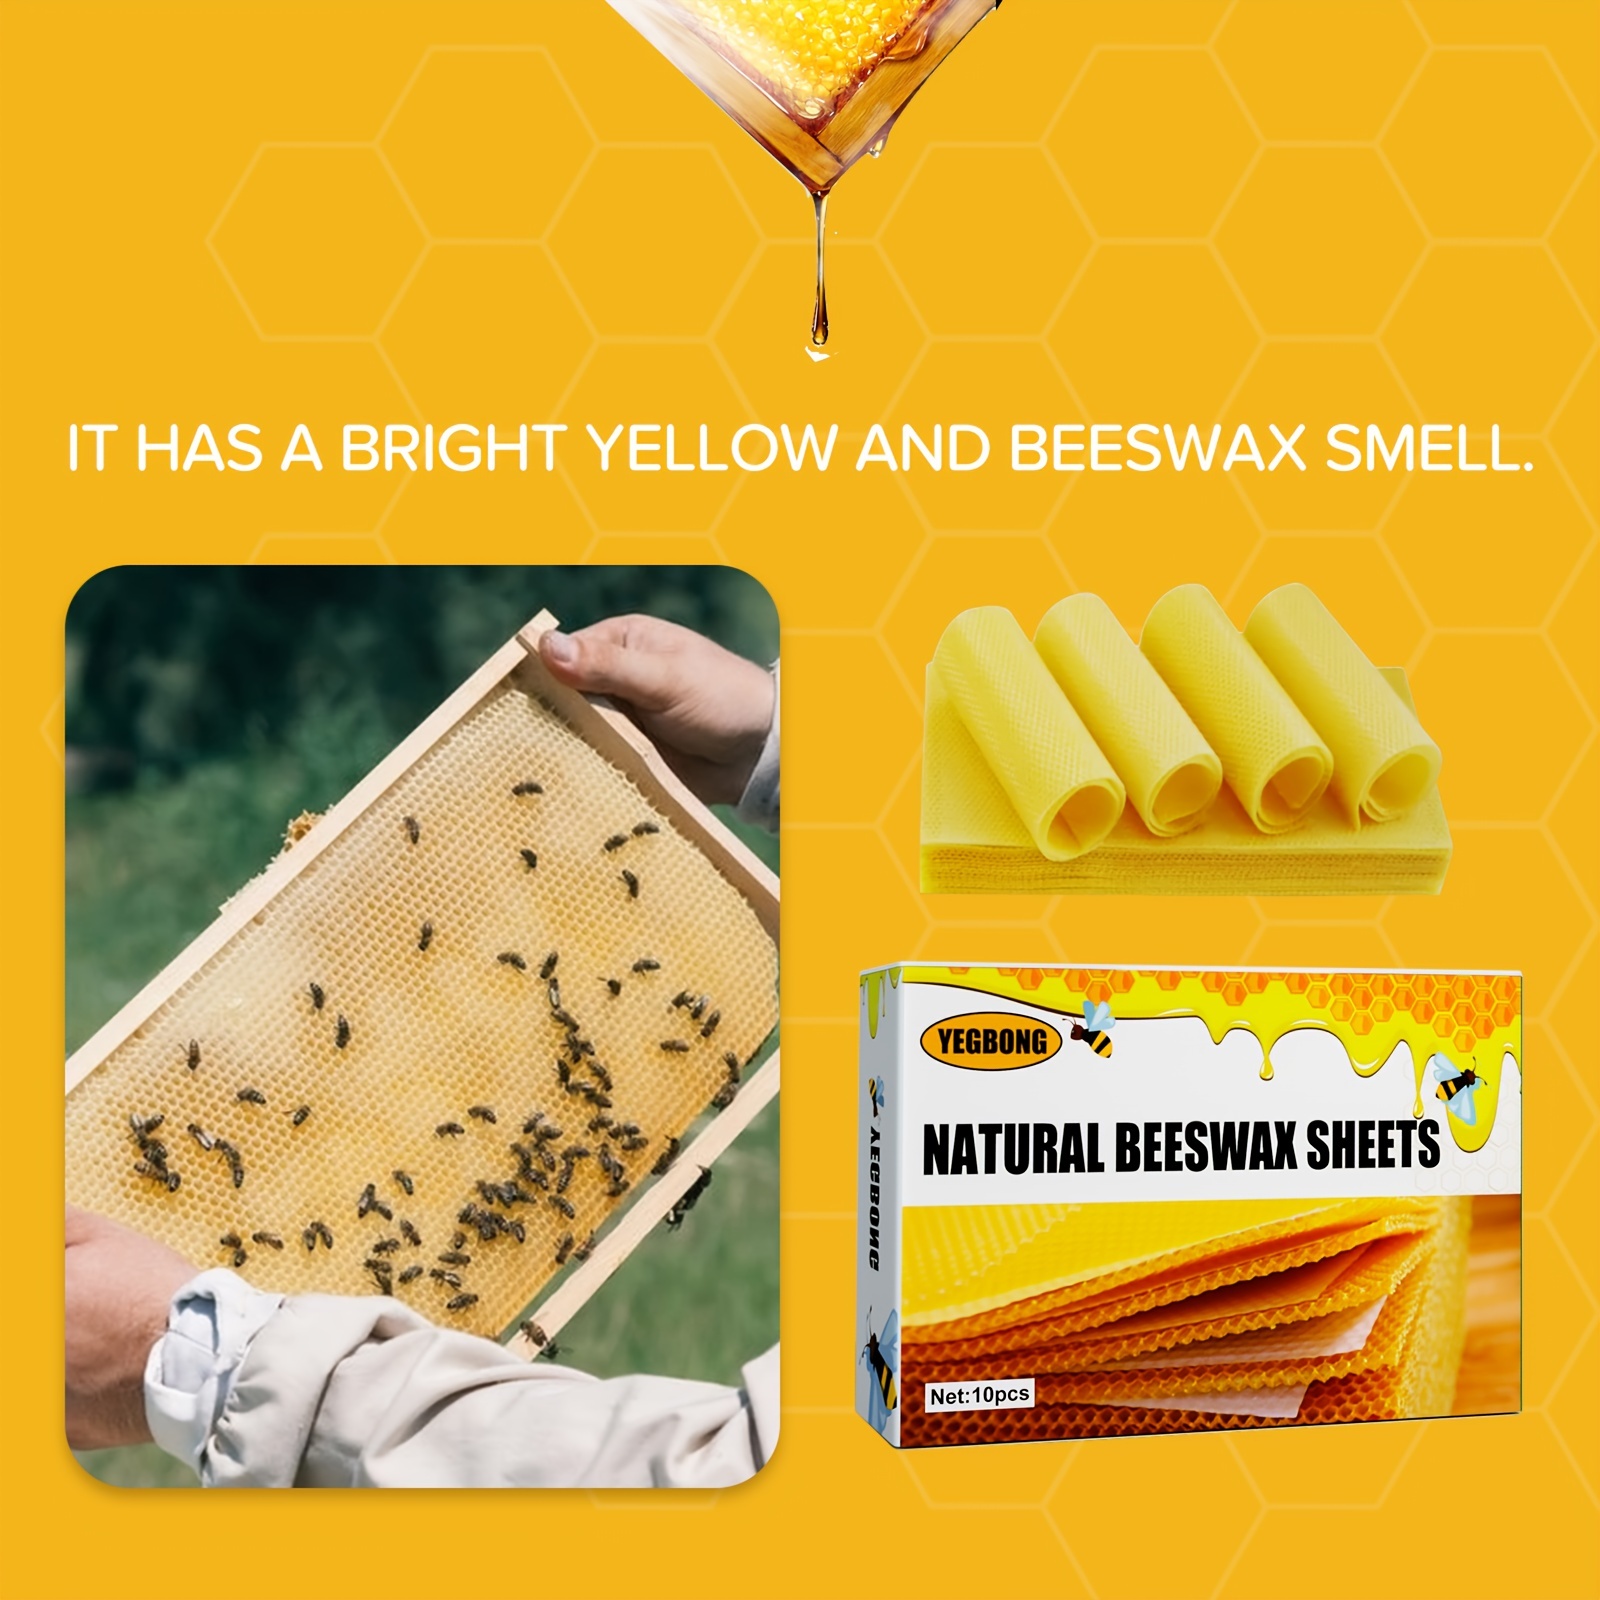 10pcs, Natural Beeswax Sheets, Beeswax Foundation Sheets, Natural Bees Wax  Honeycomb Sheets, Beekeeping Tools, Bee Tools, Useful Tool, Household Gadge